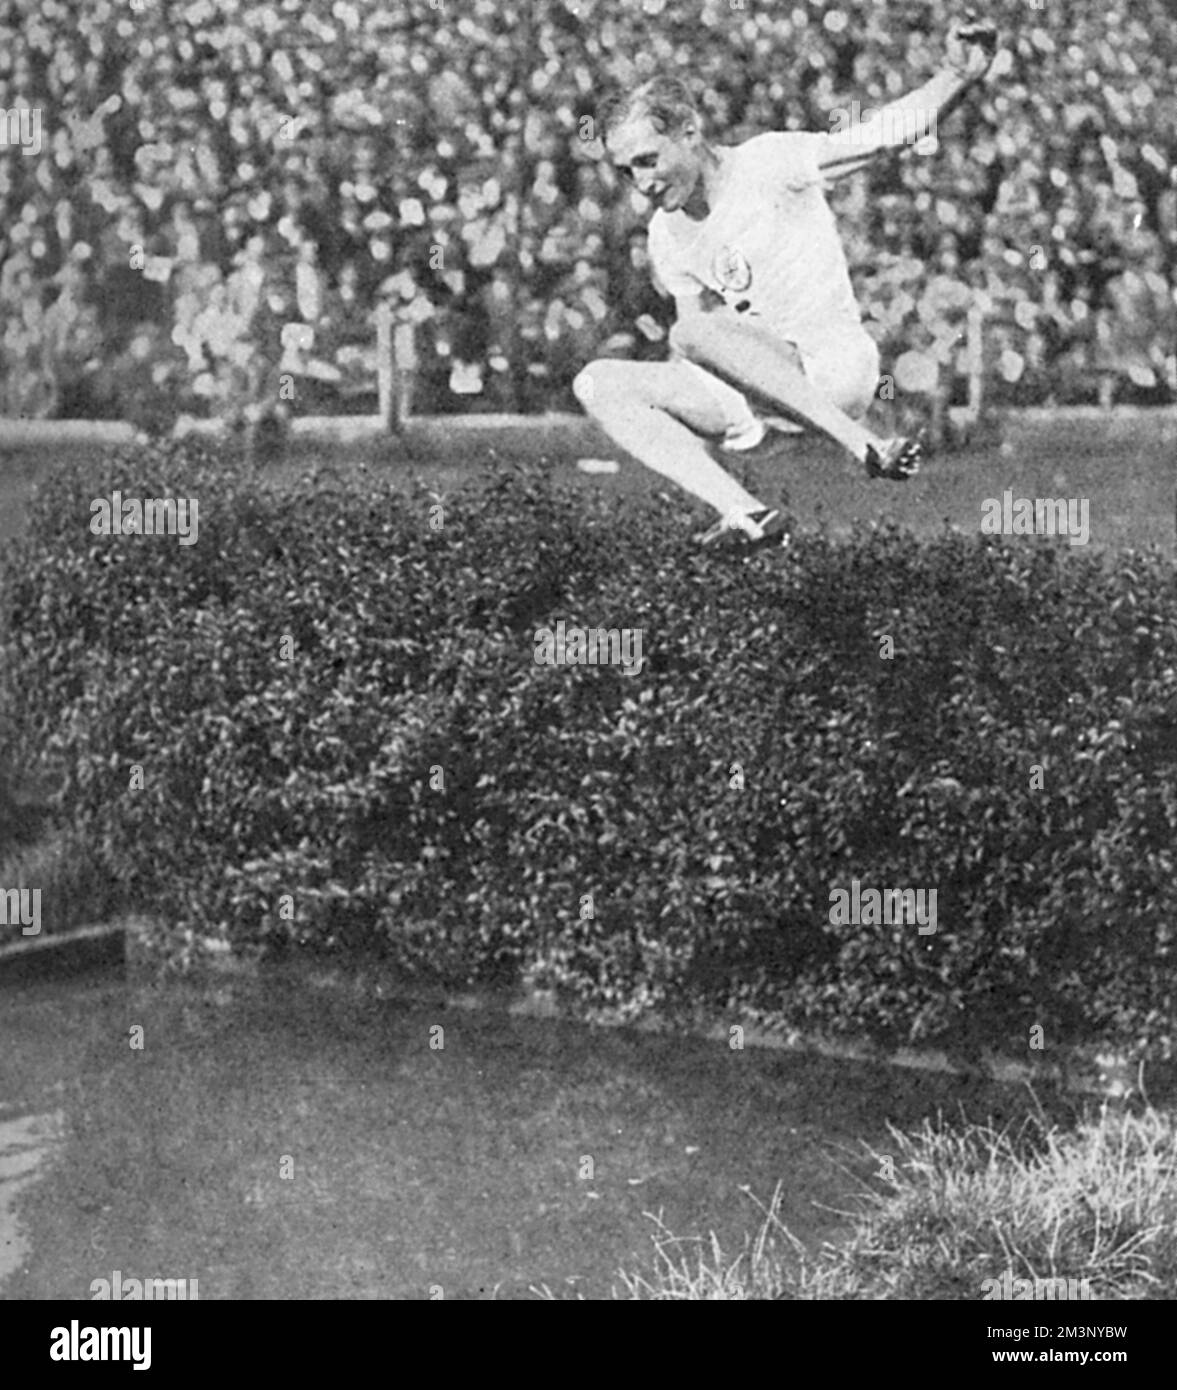 400 metres hurdles gold medallist, Lord Burghley, at the water jump in the steeplechase at an athletics meeting at Stamford Bridge, shortly after his win at the 1928 Amsterdam Olympic Games.  David George Brownlow Cecil, 6th Marquess of Exeter (1905 - 1981), Lord Burghley was an athlete, sports official and Conservative party politician   As an athlete, Burghley was a very keen practitioner who placed matchboxes on hurdles and practised knocking over the matchboxes with his lead foot without touching the hurdle. In 1927, his final year at Magdalene College, Cambridge, he amazed colleagues by s Stock Photo